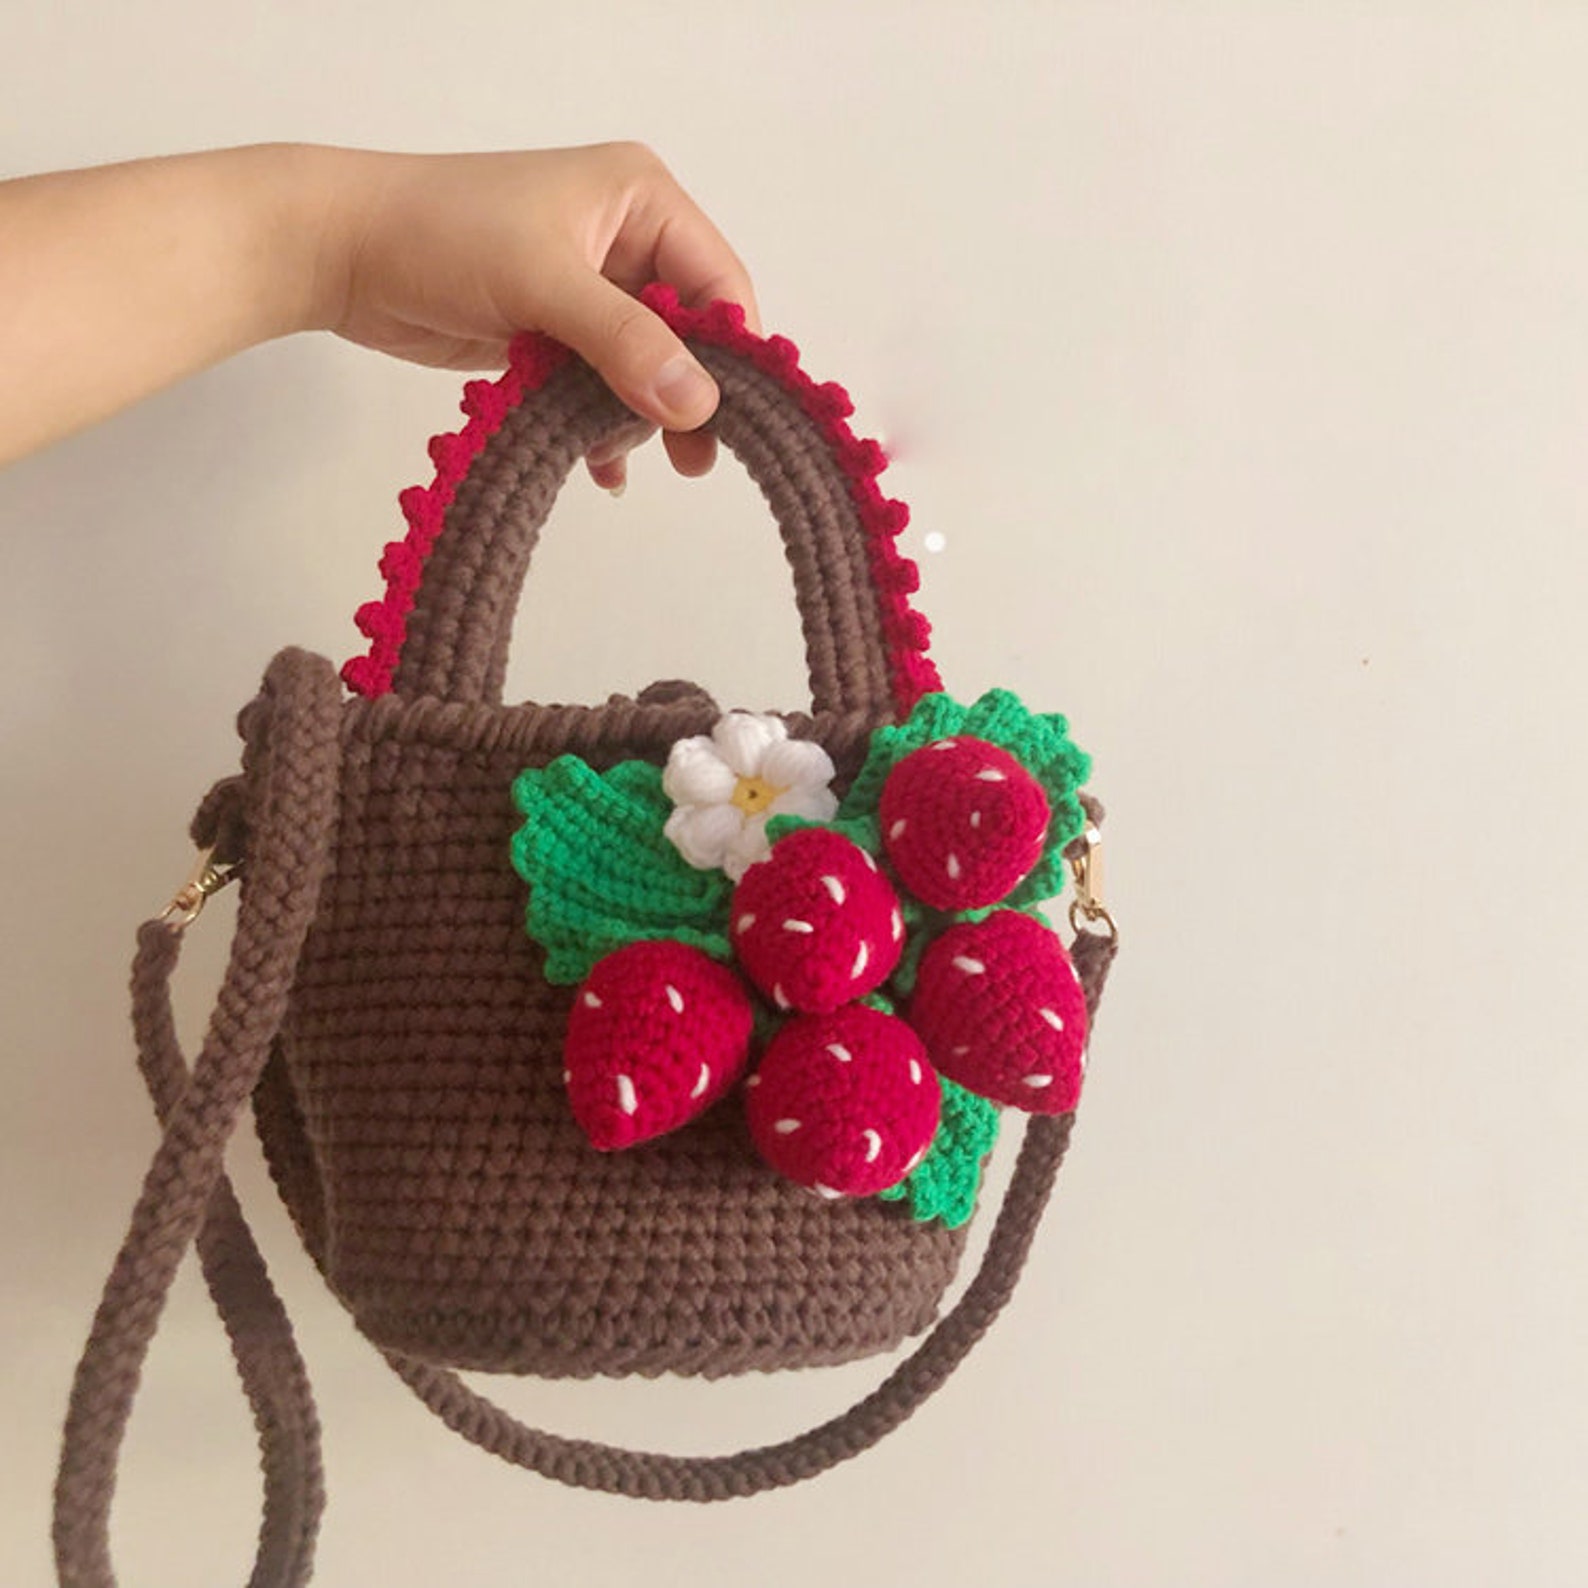 Handmade Knitted Strawberry Tote Bag Strawberry Pendant - Etsy